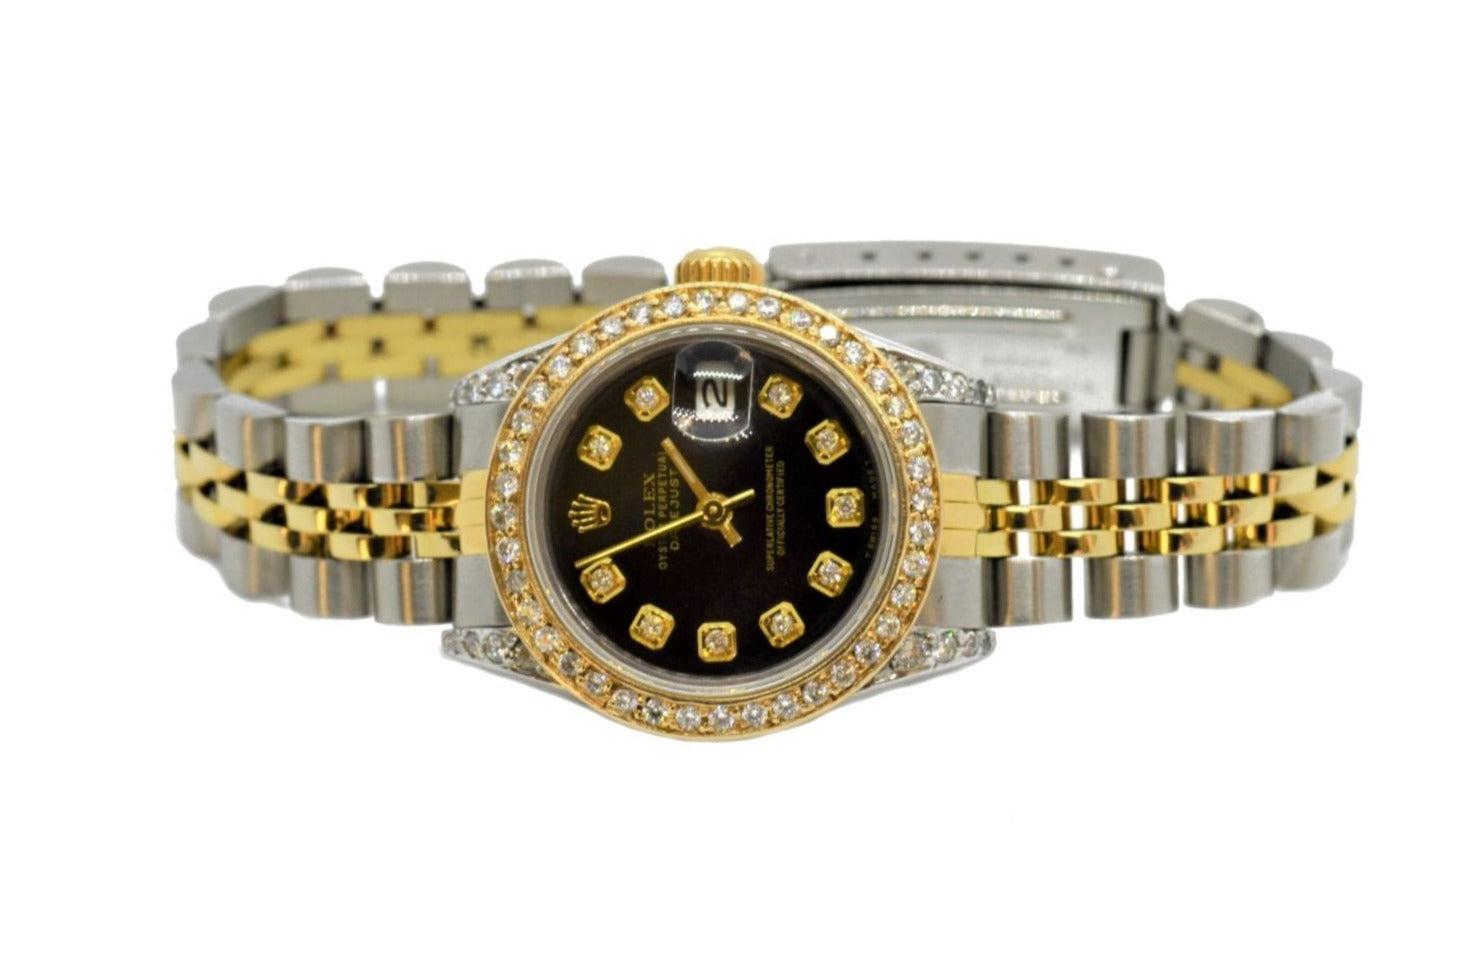 (Item Description)
Brand - Rolex
Style - Datejust
Case size - 26mm
Model - 69173
Metals - Steel/Yellow Gold
Crystal - Sapphire
Dial - Custom Black Diamond
Movement - Rolex Auto Cal-2135
Bezel - Custom Yellow Gold Diamond
Wrist Band - Rolex Two-Tone